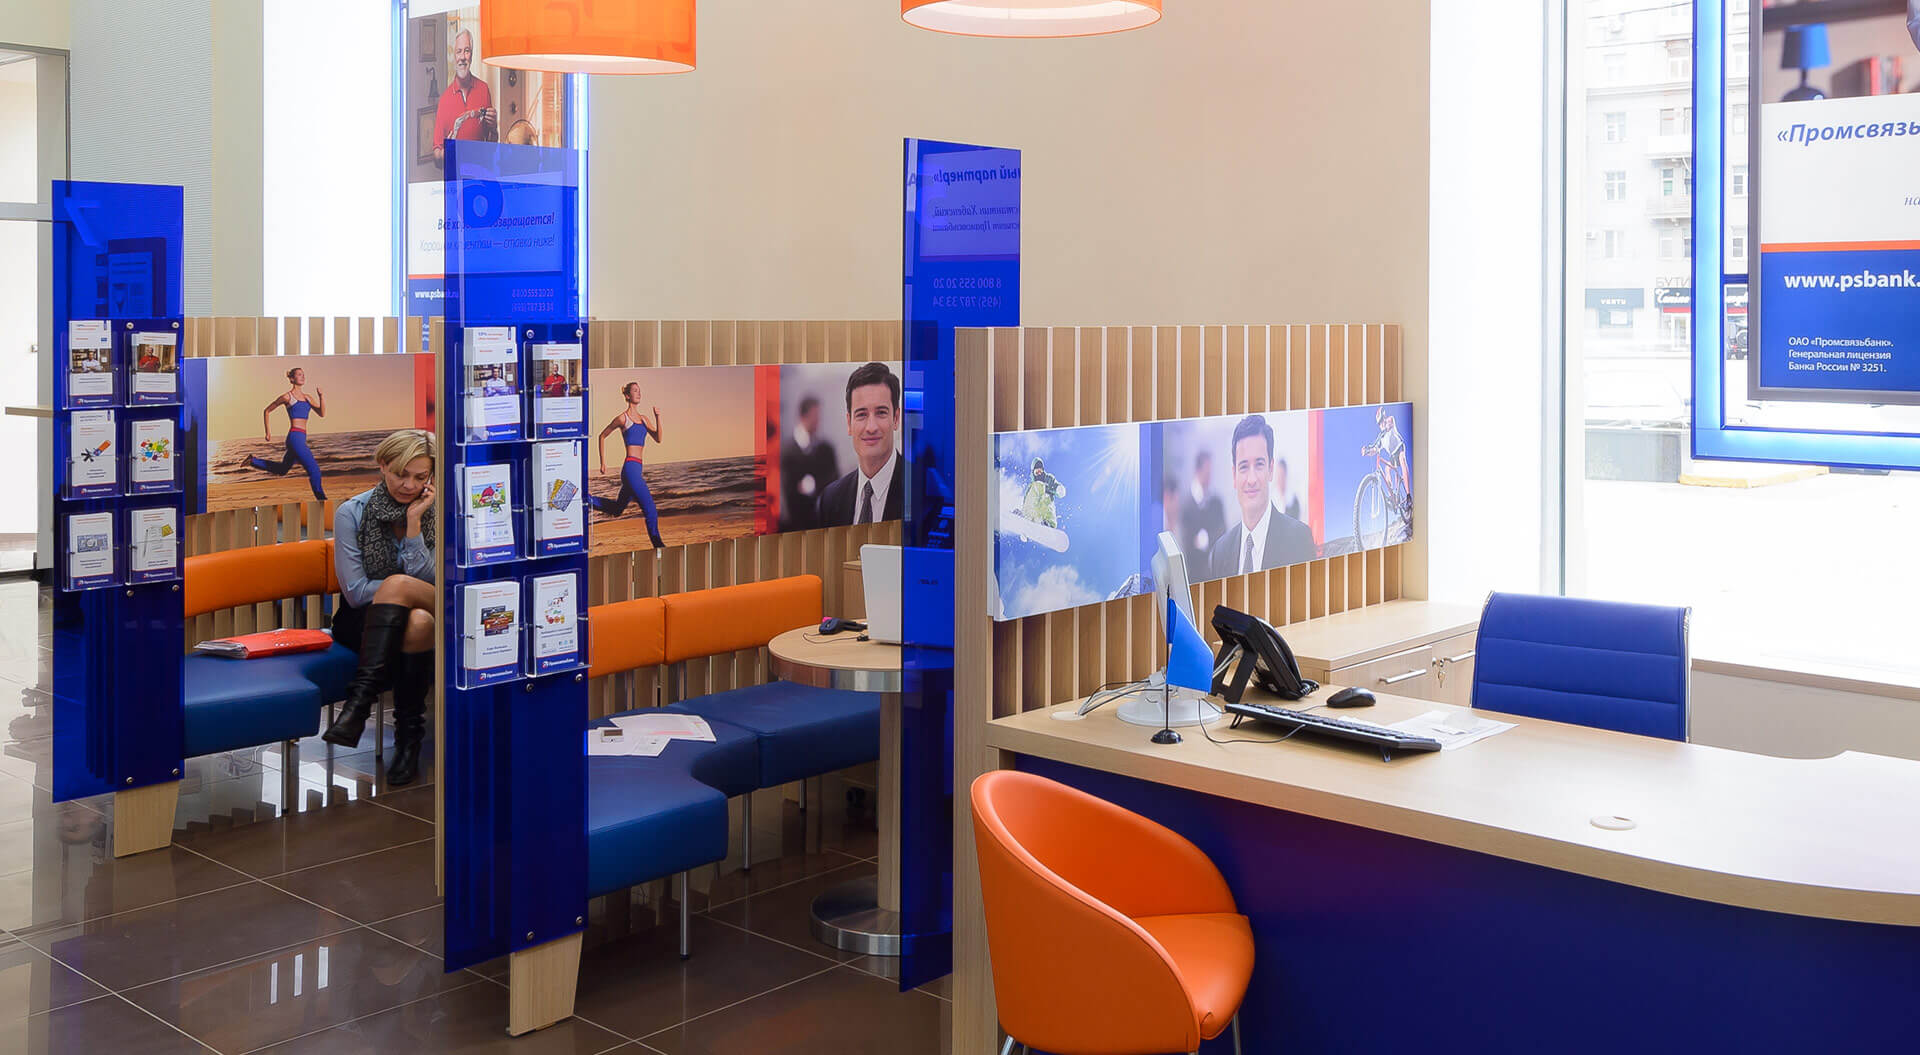 Promsvyazbank consultation stations branch retail interior banking hall design and branding